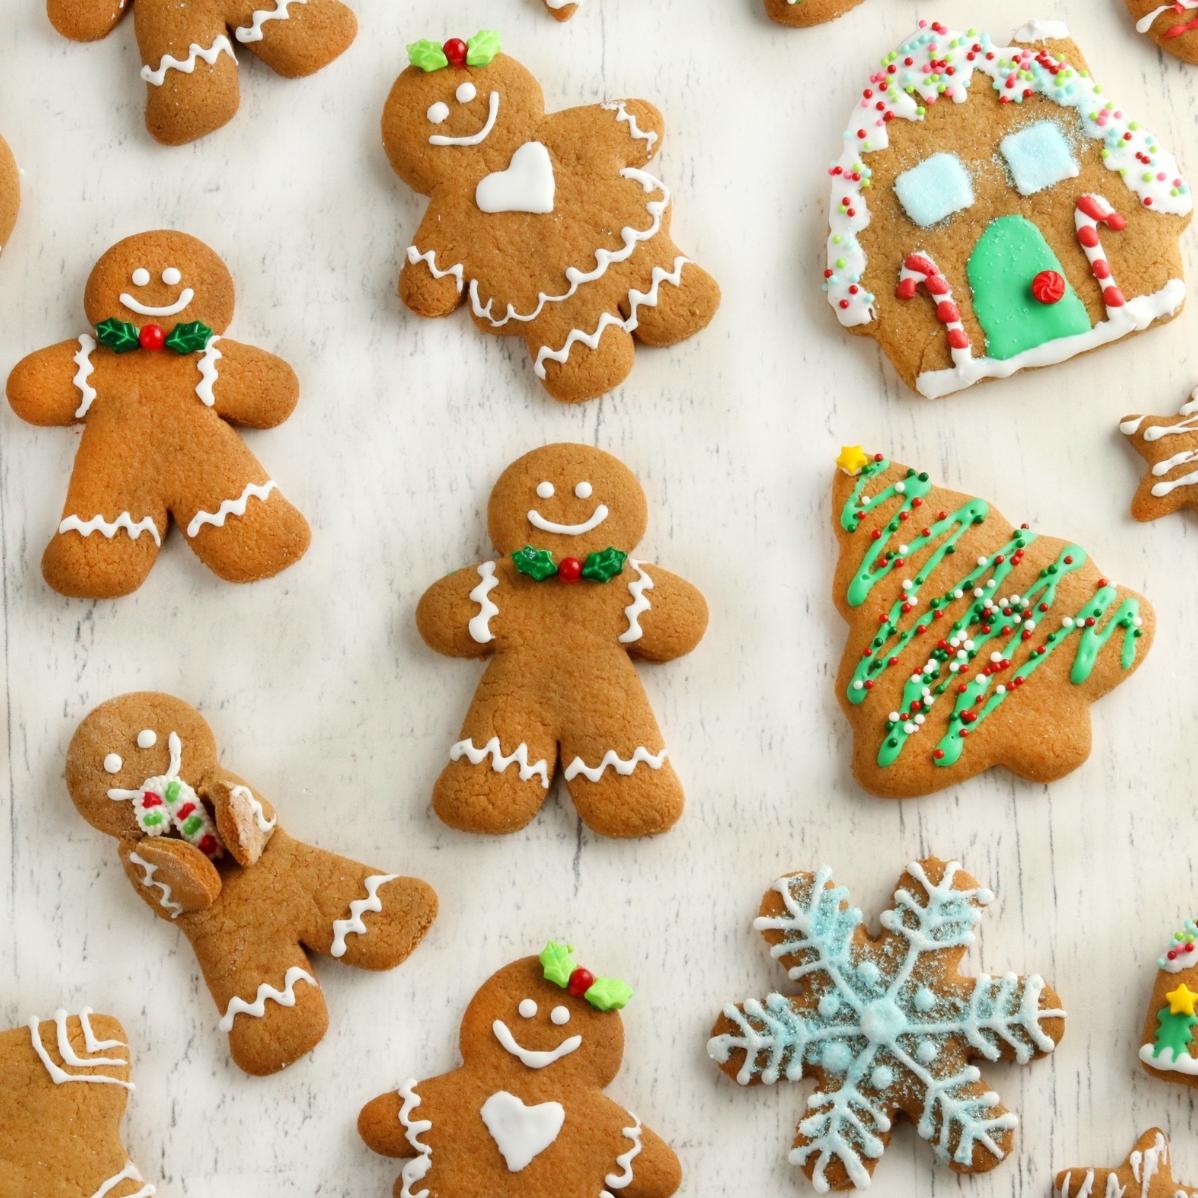  With the perfect blend of spices and sweetness, these gingerbread cookies will be a hit at any gathering